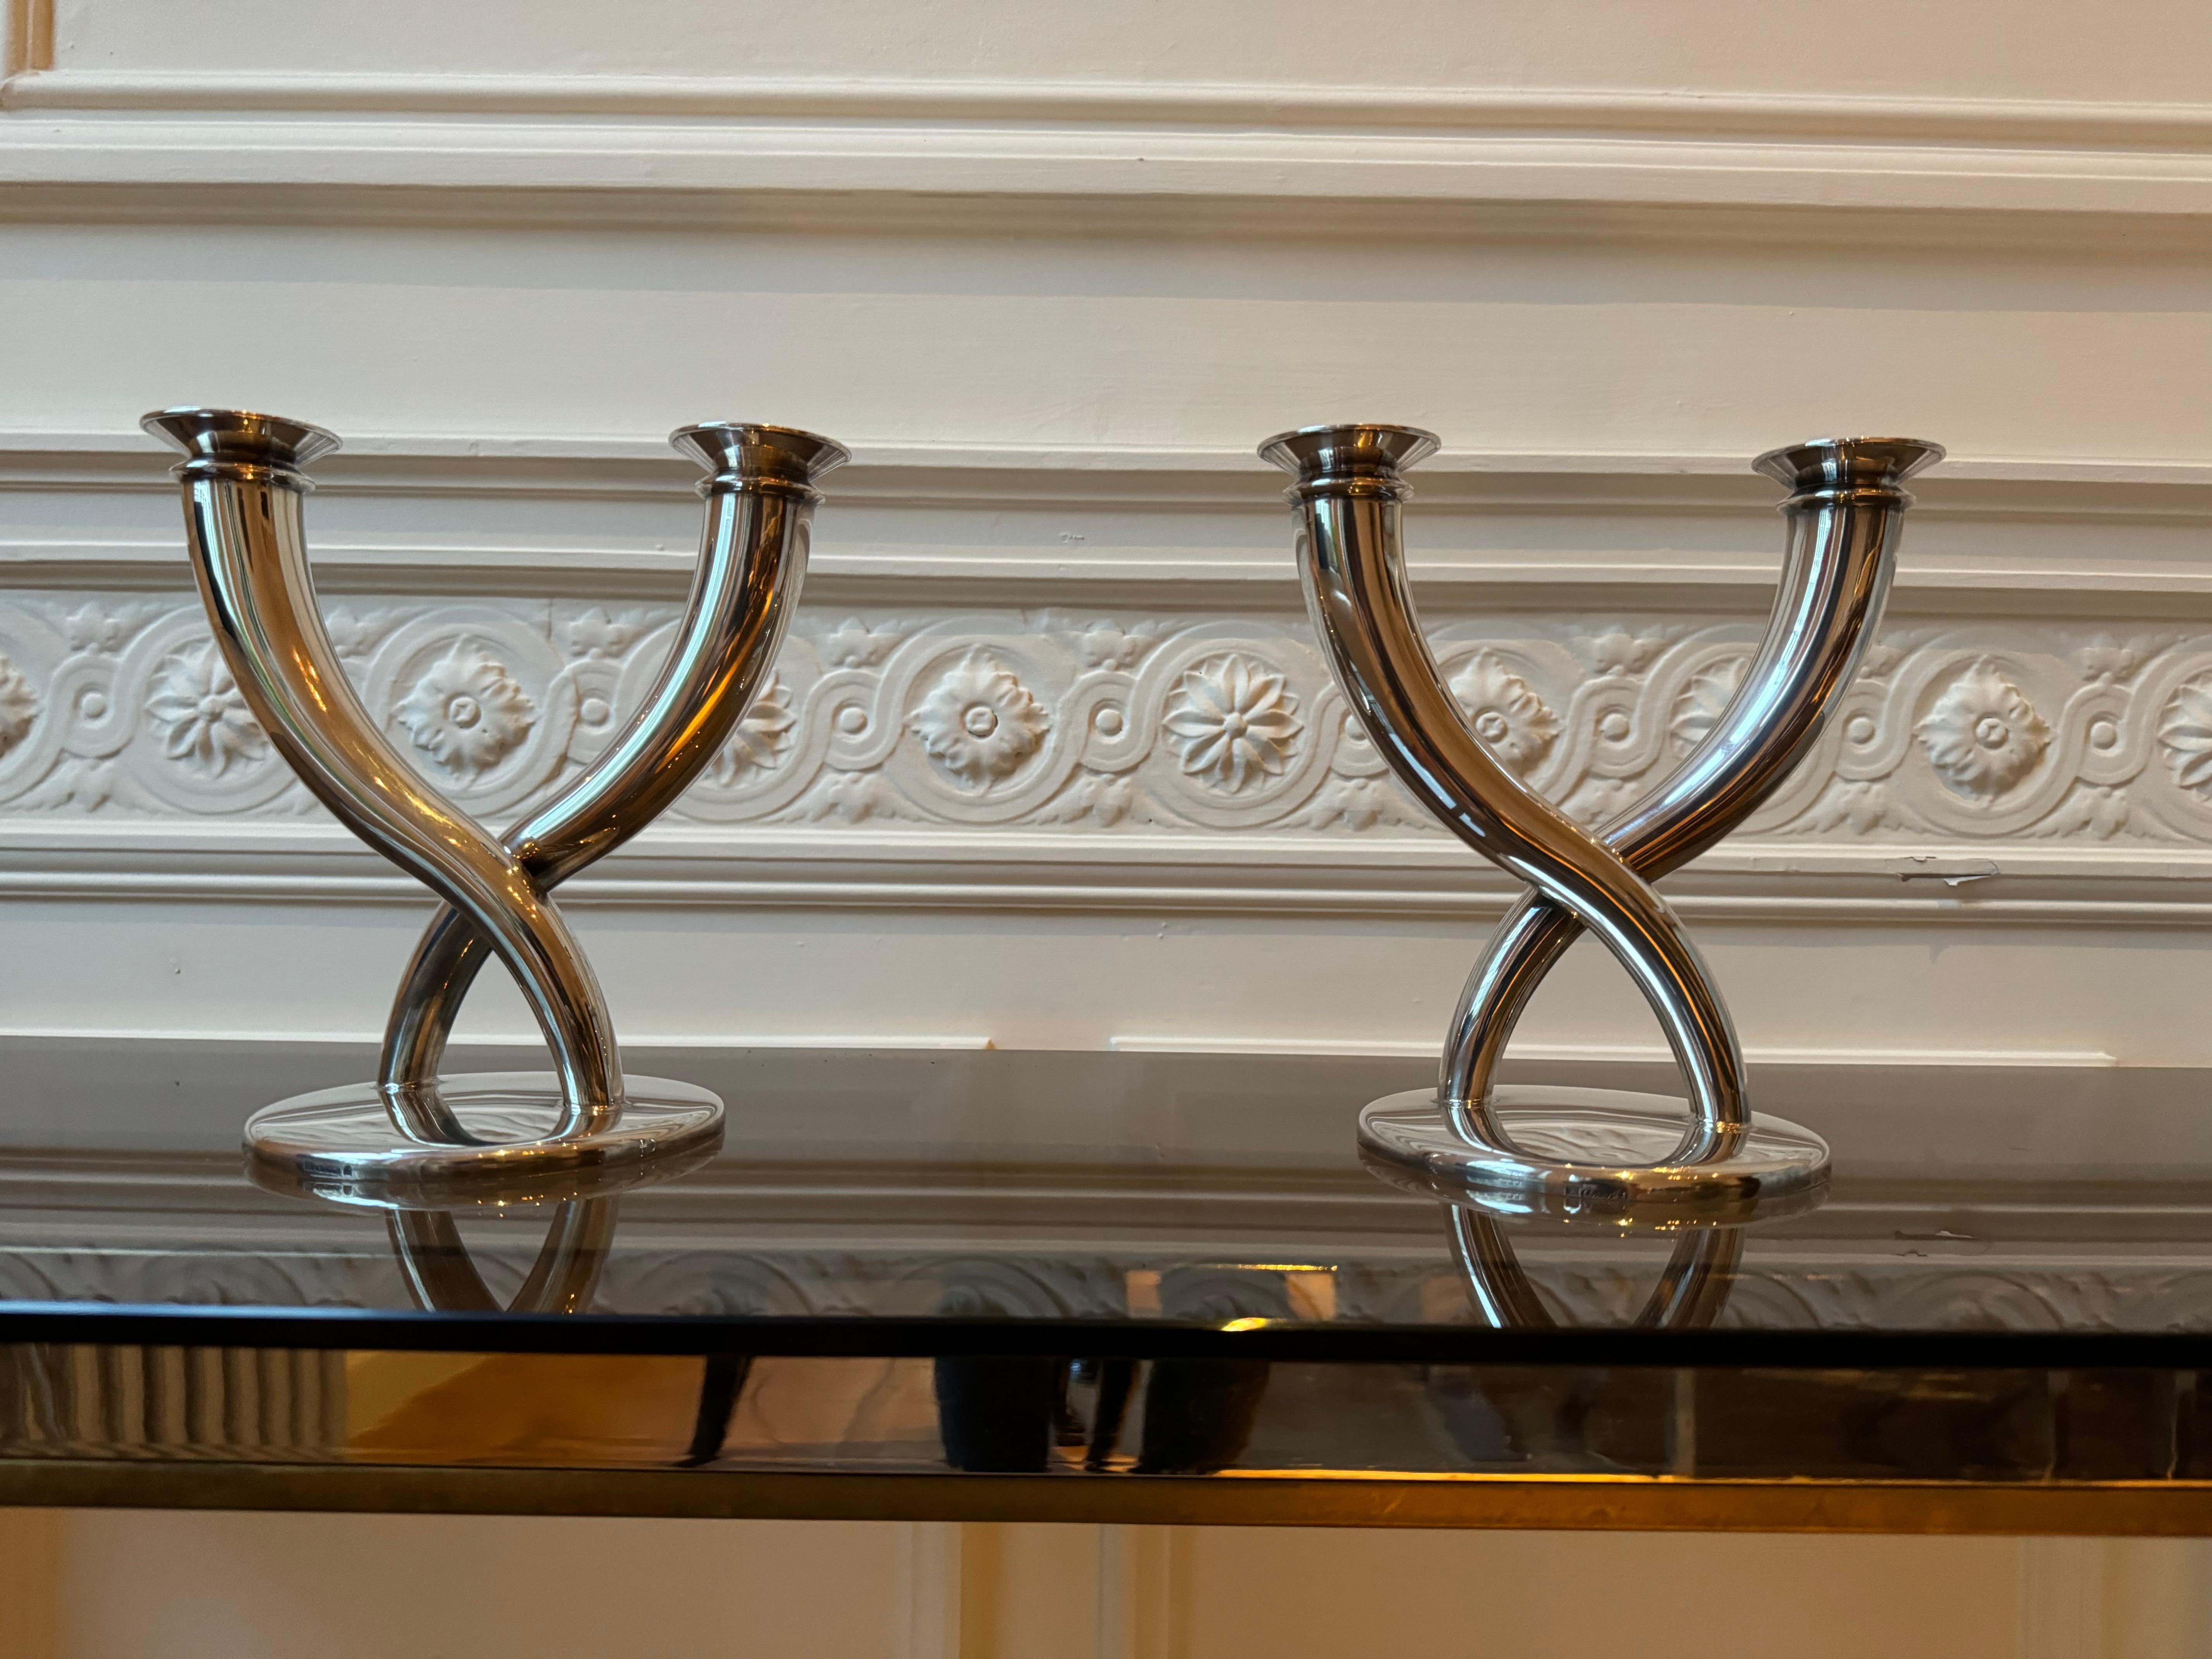 Pair of silver candelsticks designed by the famous Milanese architect and designer Gio Ponti. The candlesticks are two branches mounted on a round base, and they go upwards, slightly broadning towards the top, as they cross each other at around a